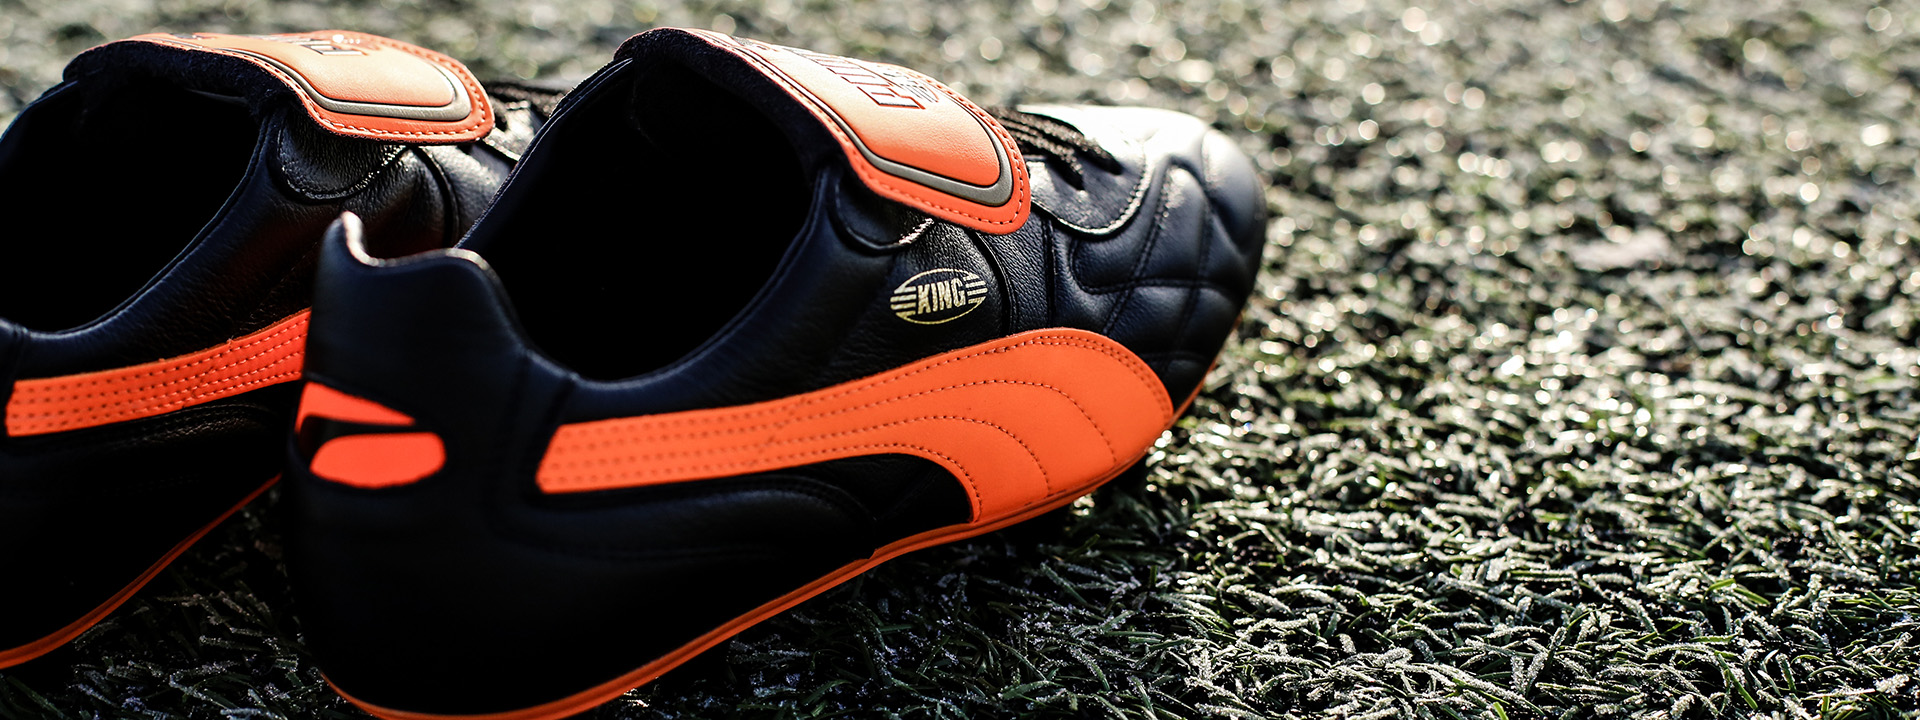 puma-king-made-in-italy-colors-1920x720-3.jpg